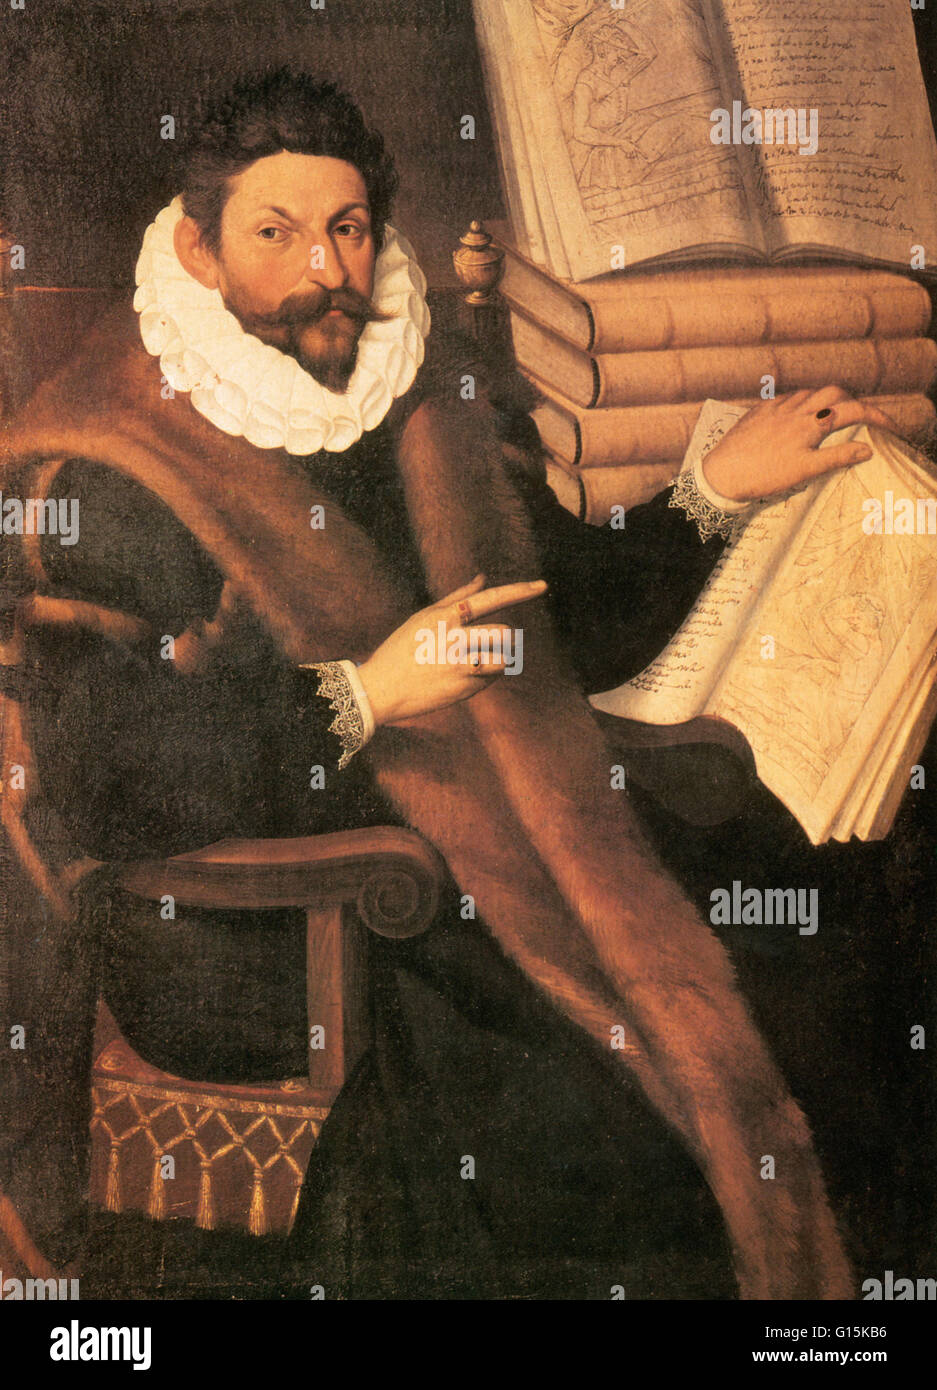 Portrait of Gaspare Tagliacozzi (1547-1599), attributed to Tiburzio Passarotti, c. 1575.  In this painting, the Italian surgeon is shown with many copies of his book on plastic surgery, De Curtorum Chirurgia Per Institionem (1597).  The copy he is holding Stock Photo